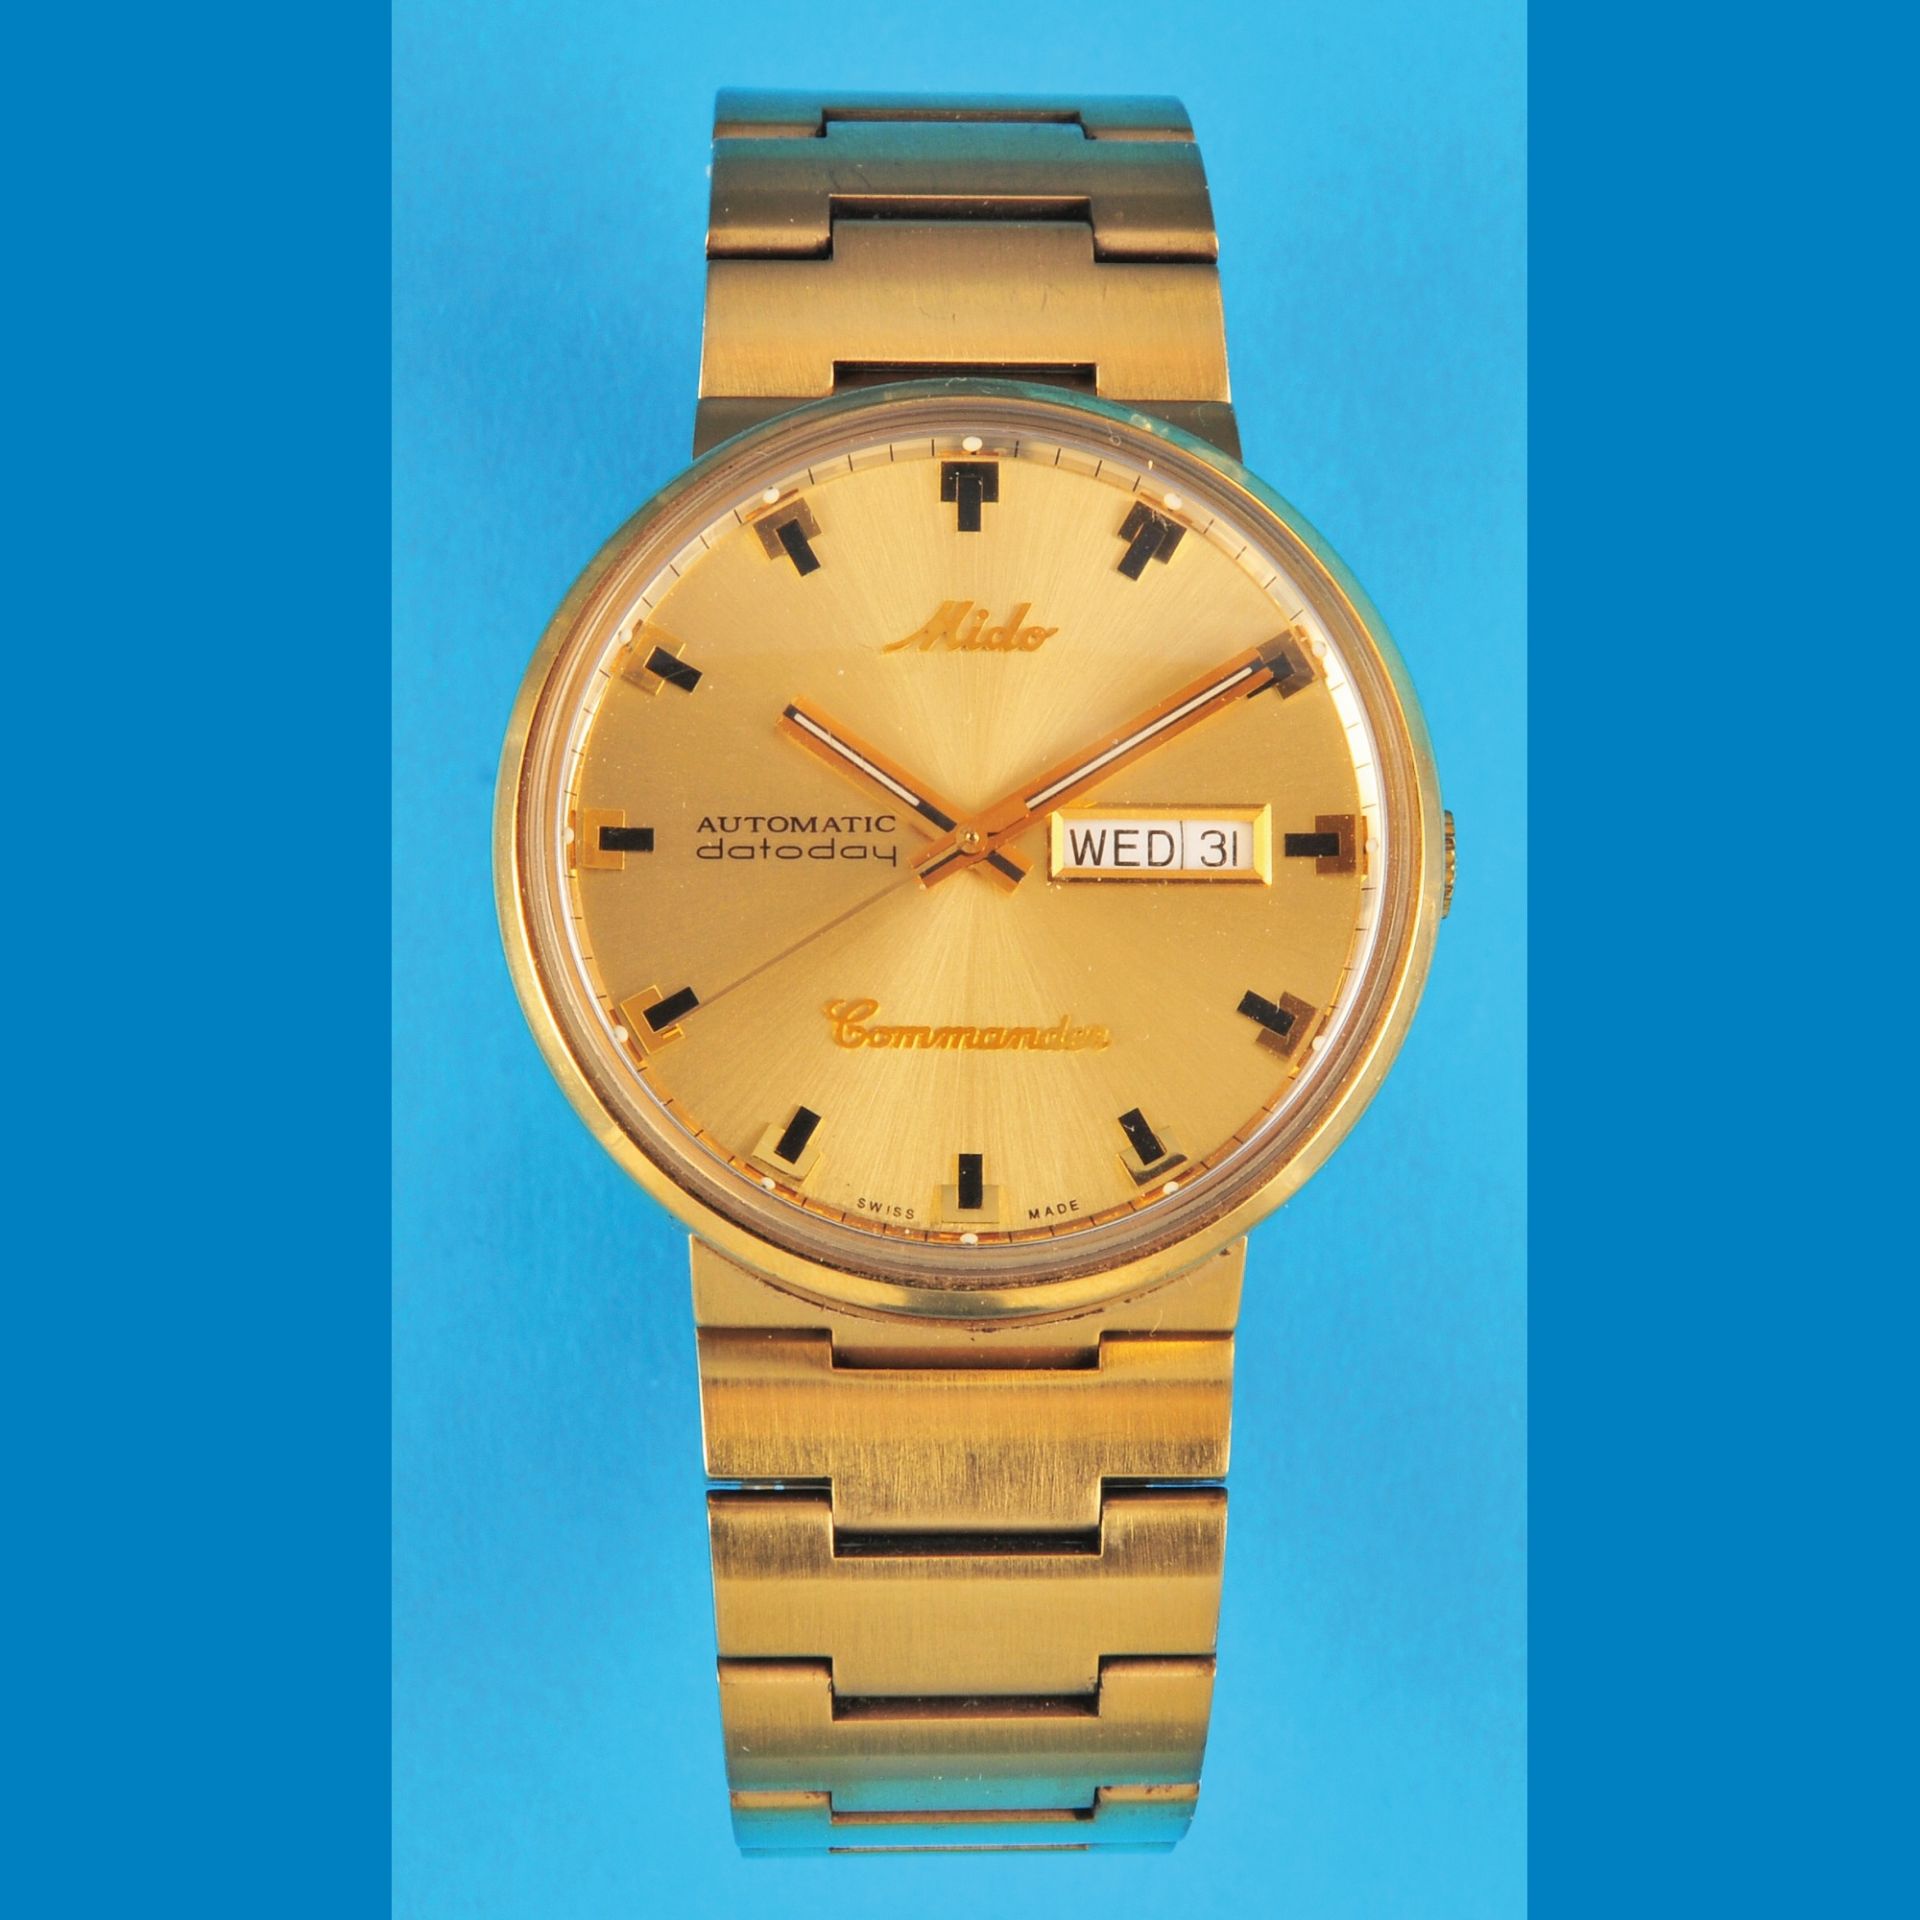 Mido Commander Automatic Datoday, gold plated monocoque steel case